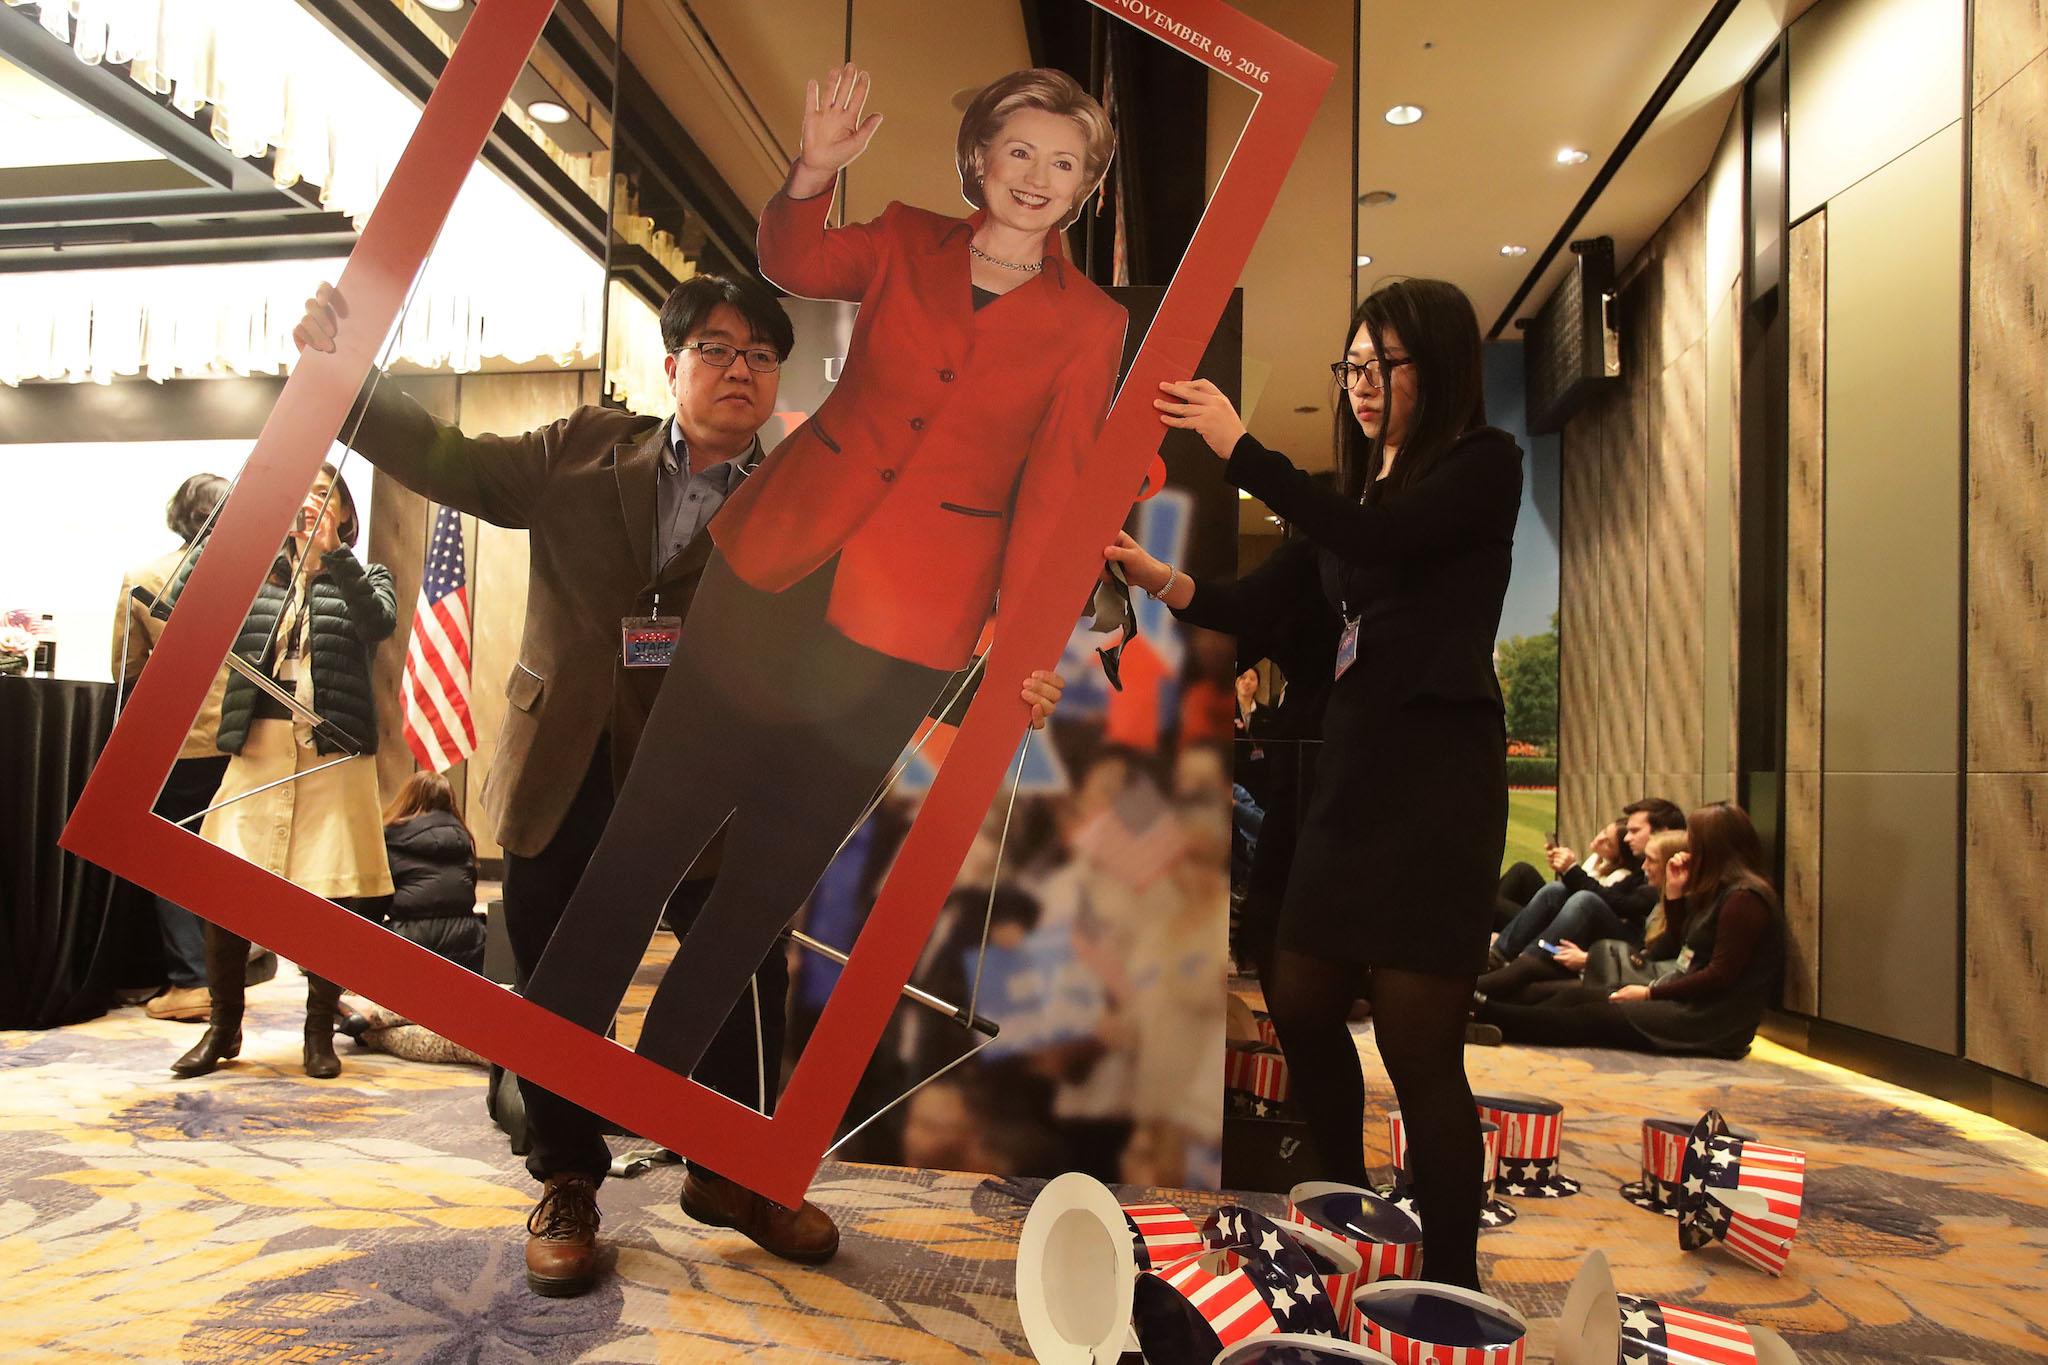 People carrie a picture of Democratic presidential candidate Hillary Clinton after a election watch event on November 9, 2016 in Seoul, South Korea